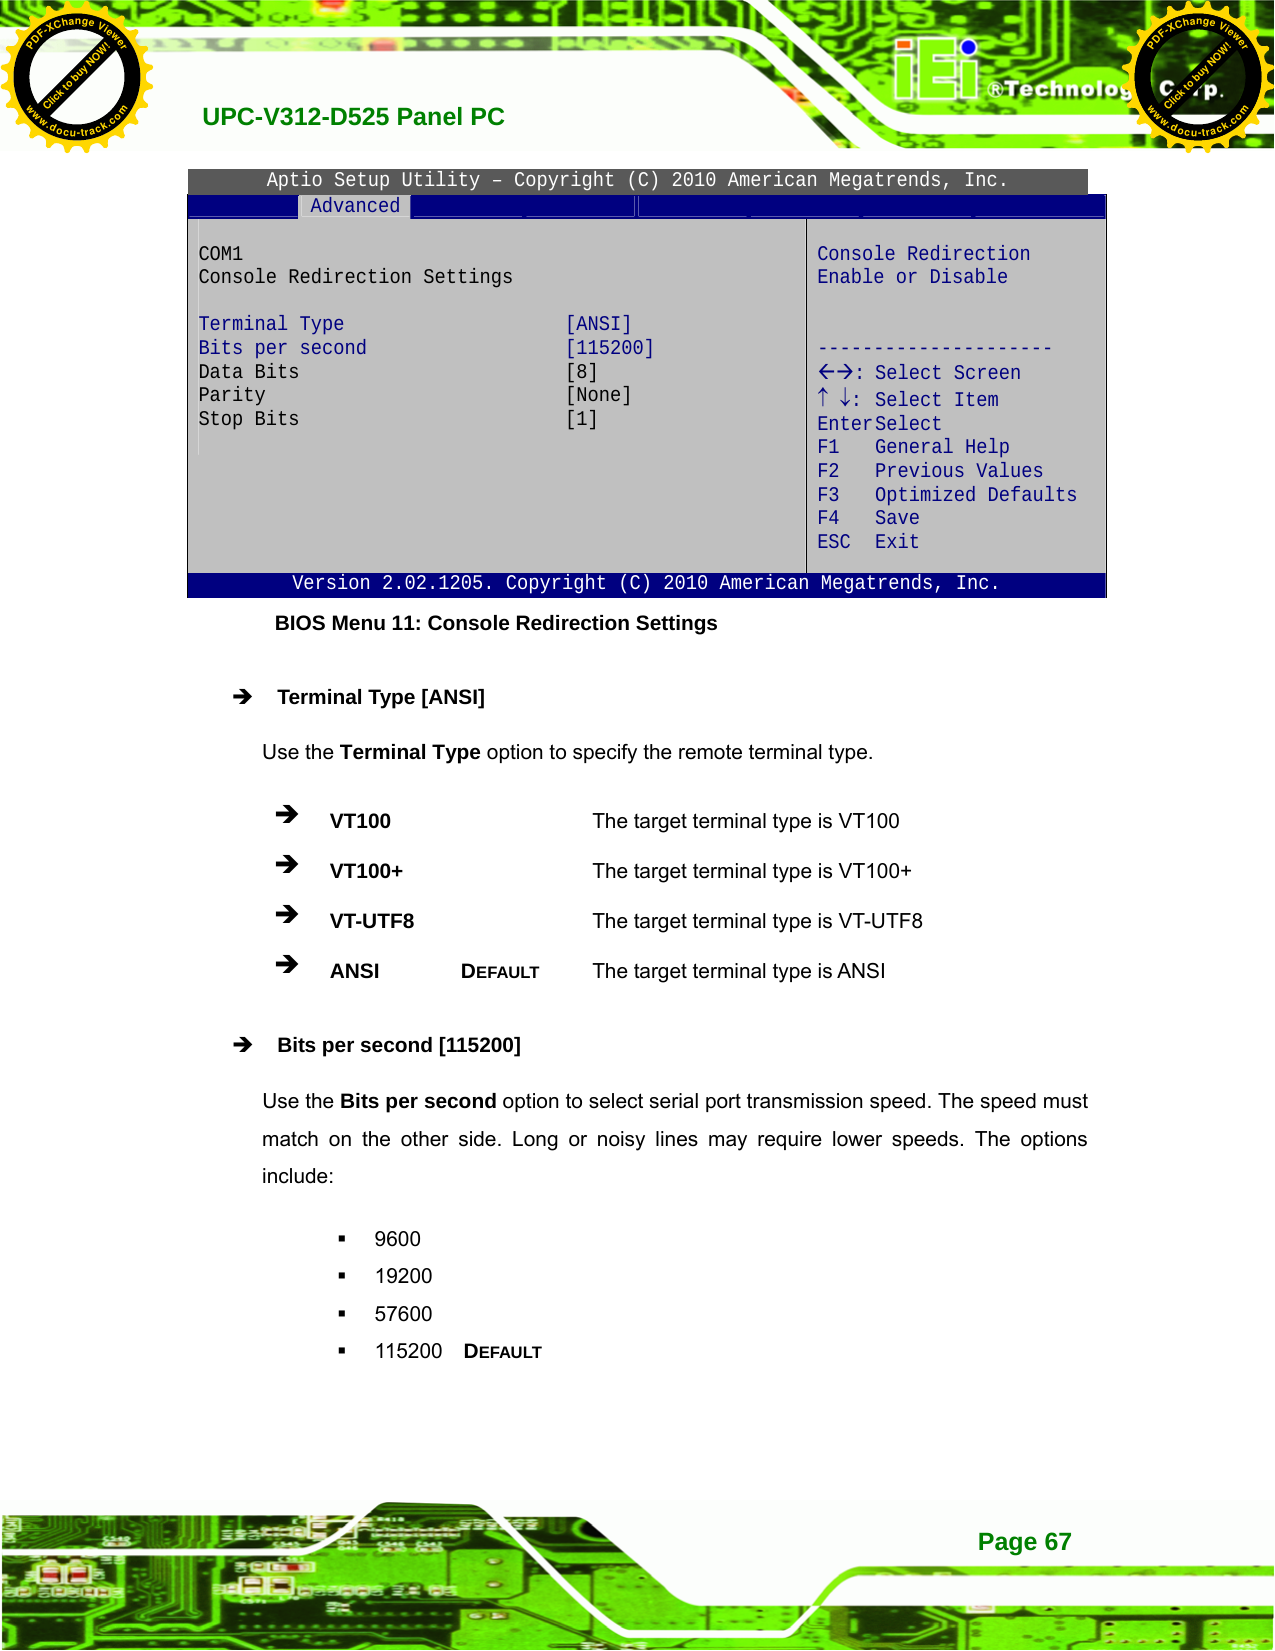   UPC-V312-D525 Panel PC Page 67Aptio Setup Utility – Copyright (C) 2010 American Megatrends, Inc.  Advanced              COM1  Console Redirection Settings  Terminal Type  [ANSI] Bits per second  [115200] Data Bits  [8] Parity [None] Stop Bits  [1]   Console Redirection Enable or Disable   --------------------- ÅÆ: Select Screen ↑ ↓: Select Item Enter Select F1 General Help F2 Previous Values F3 Optimized Defaults F4 Save  ESC Exit Version 2.02.1205. Copyright (C) 2010 American Megatrends, Inc. BIOS Menu 11: Console Redirection Settings Î Terminal Type [ANSI] Use the Terminal Type option to specify the remote terminal type. Î VT100   The target terminal type is VT100 Î VT100+   The target terminal type is VT100+ Î VT-UTF8   The target terminal type is VT-UTF8 Î ANSI DEFAULT The target terminal type is ANSI Î Bits per second [115200] Use the Bits per second option to select serial port transmission speed. The speed must match on the other side. Long or noisy lines may require lower speeds. The options include:  9600  19200  57600  115200  DEFAULT Click to buy NOW!PDF-XChange Viewerwww.docu-track.comClick to buy NOW!PDF-XChange Viewerwww.docu-track.com